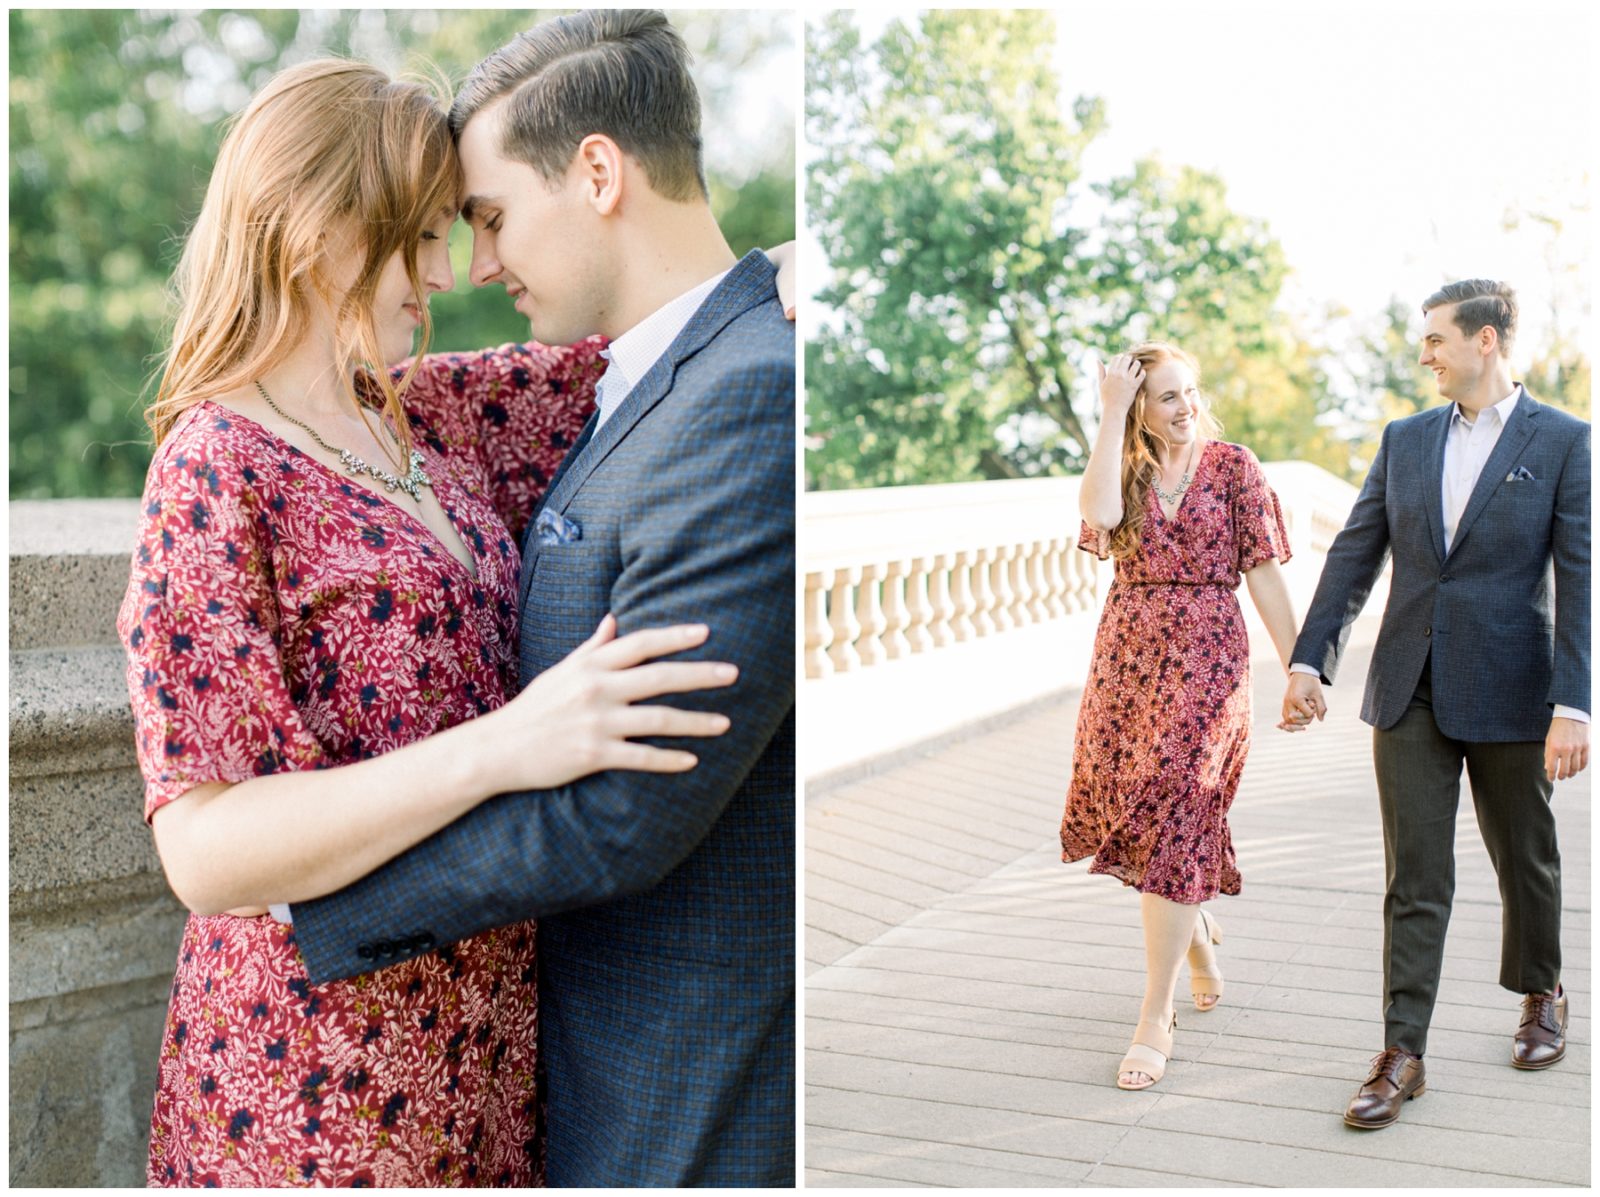 Woman wearing a dress and man wearing a suit for their engagement session